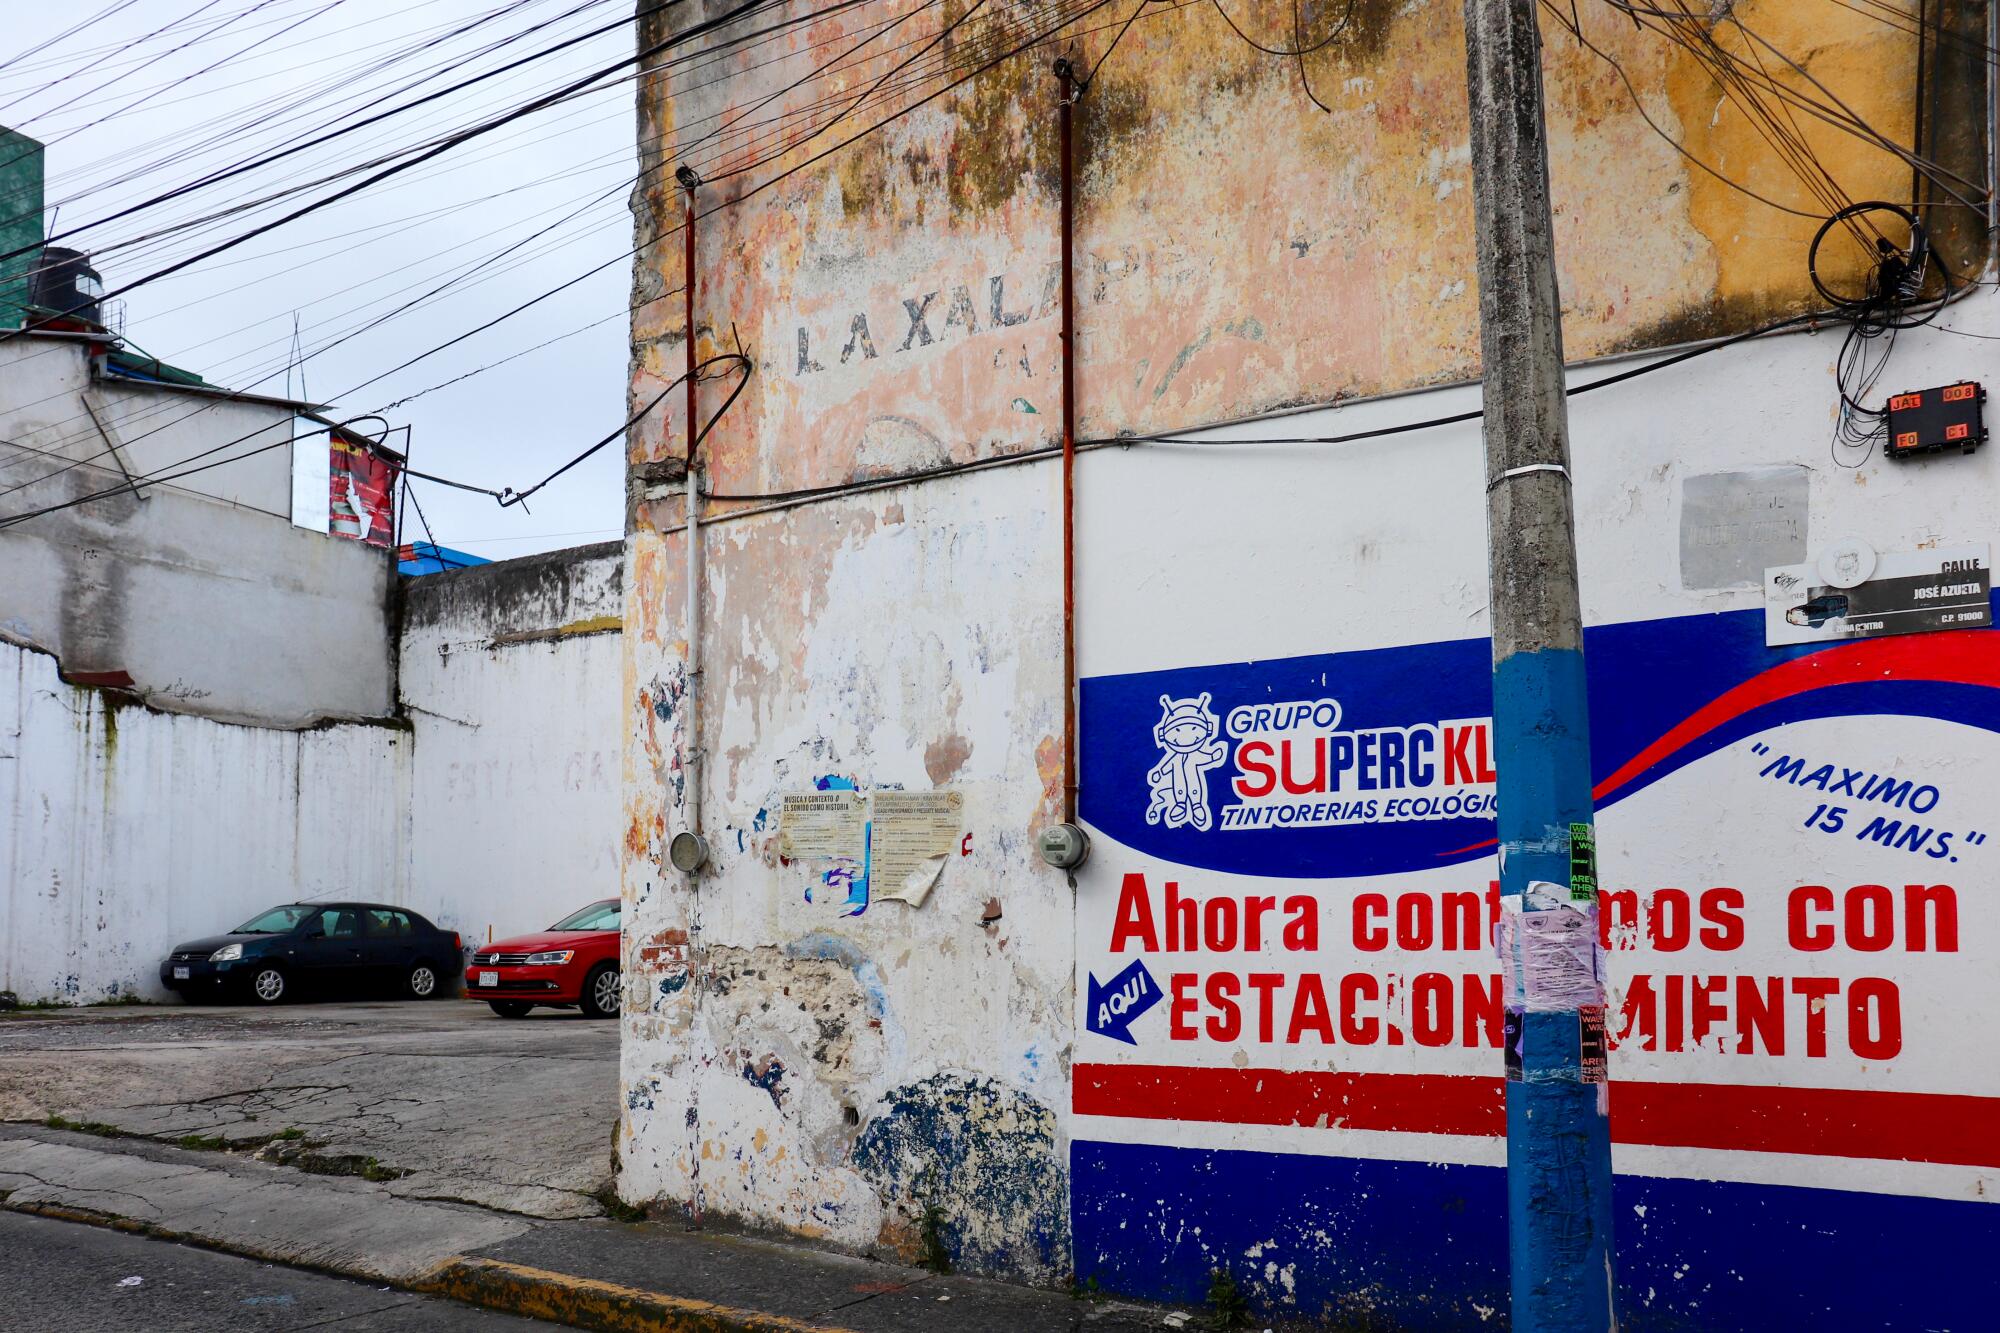 A corner of a building with a faded "xalapeño" sign.